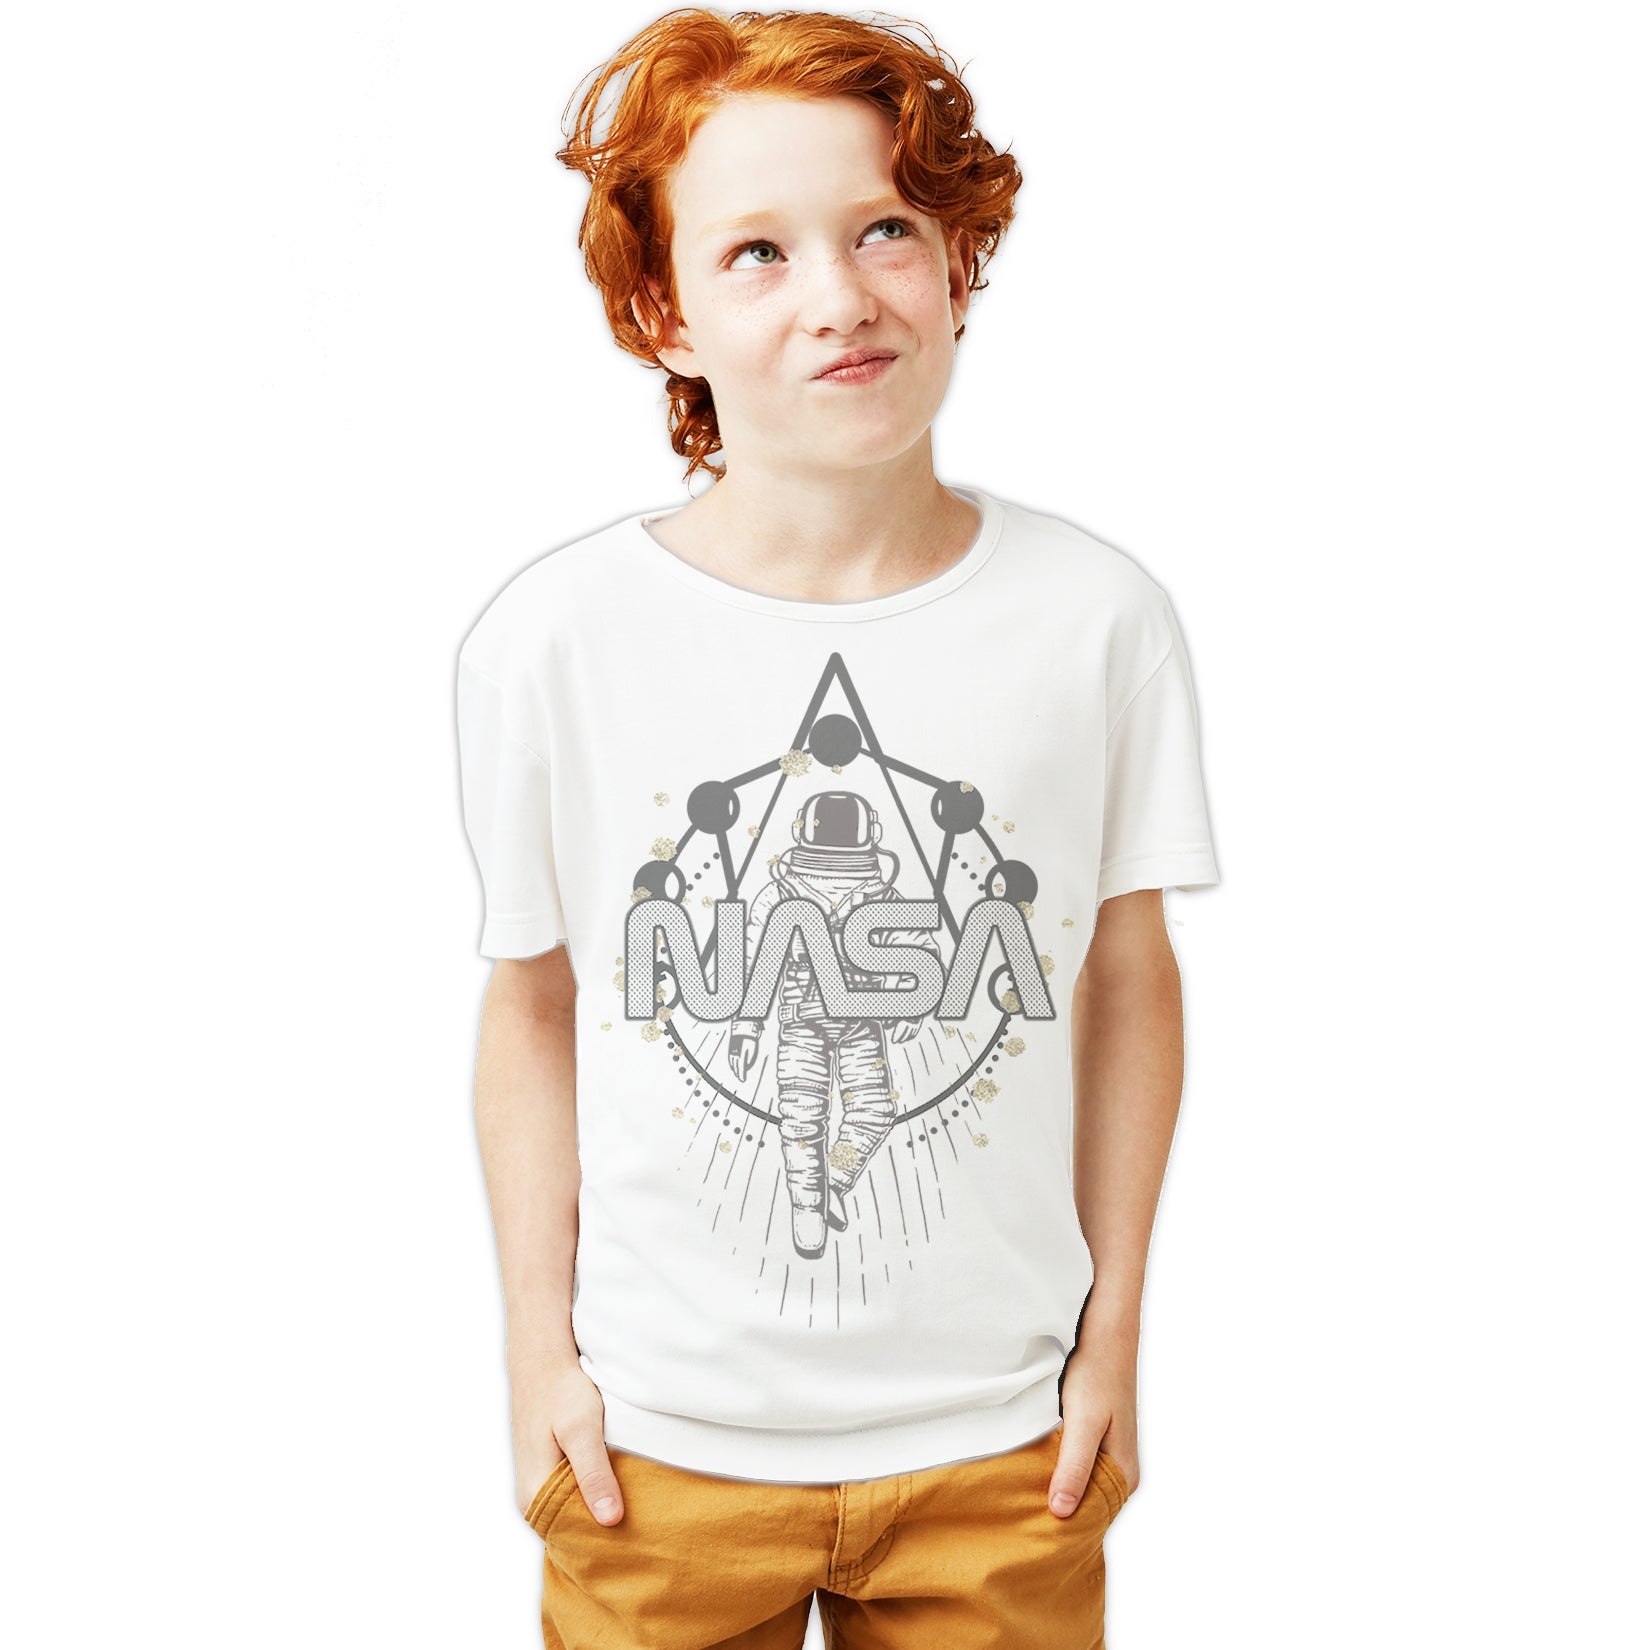 Science Space NASA Astronaut Sacred Geometry Nerd Geek Chic Official Youth T-shirt